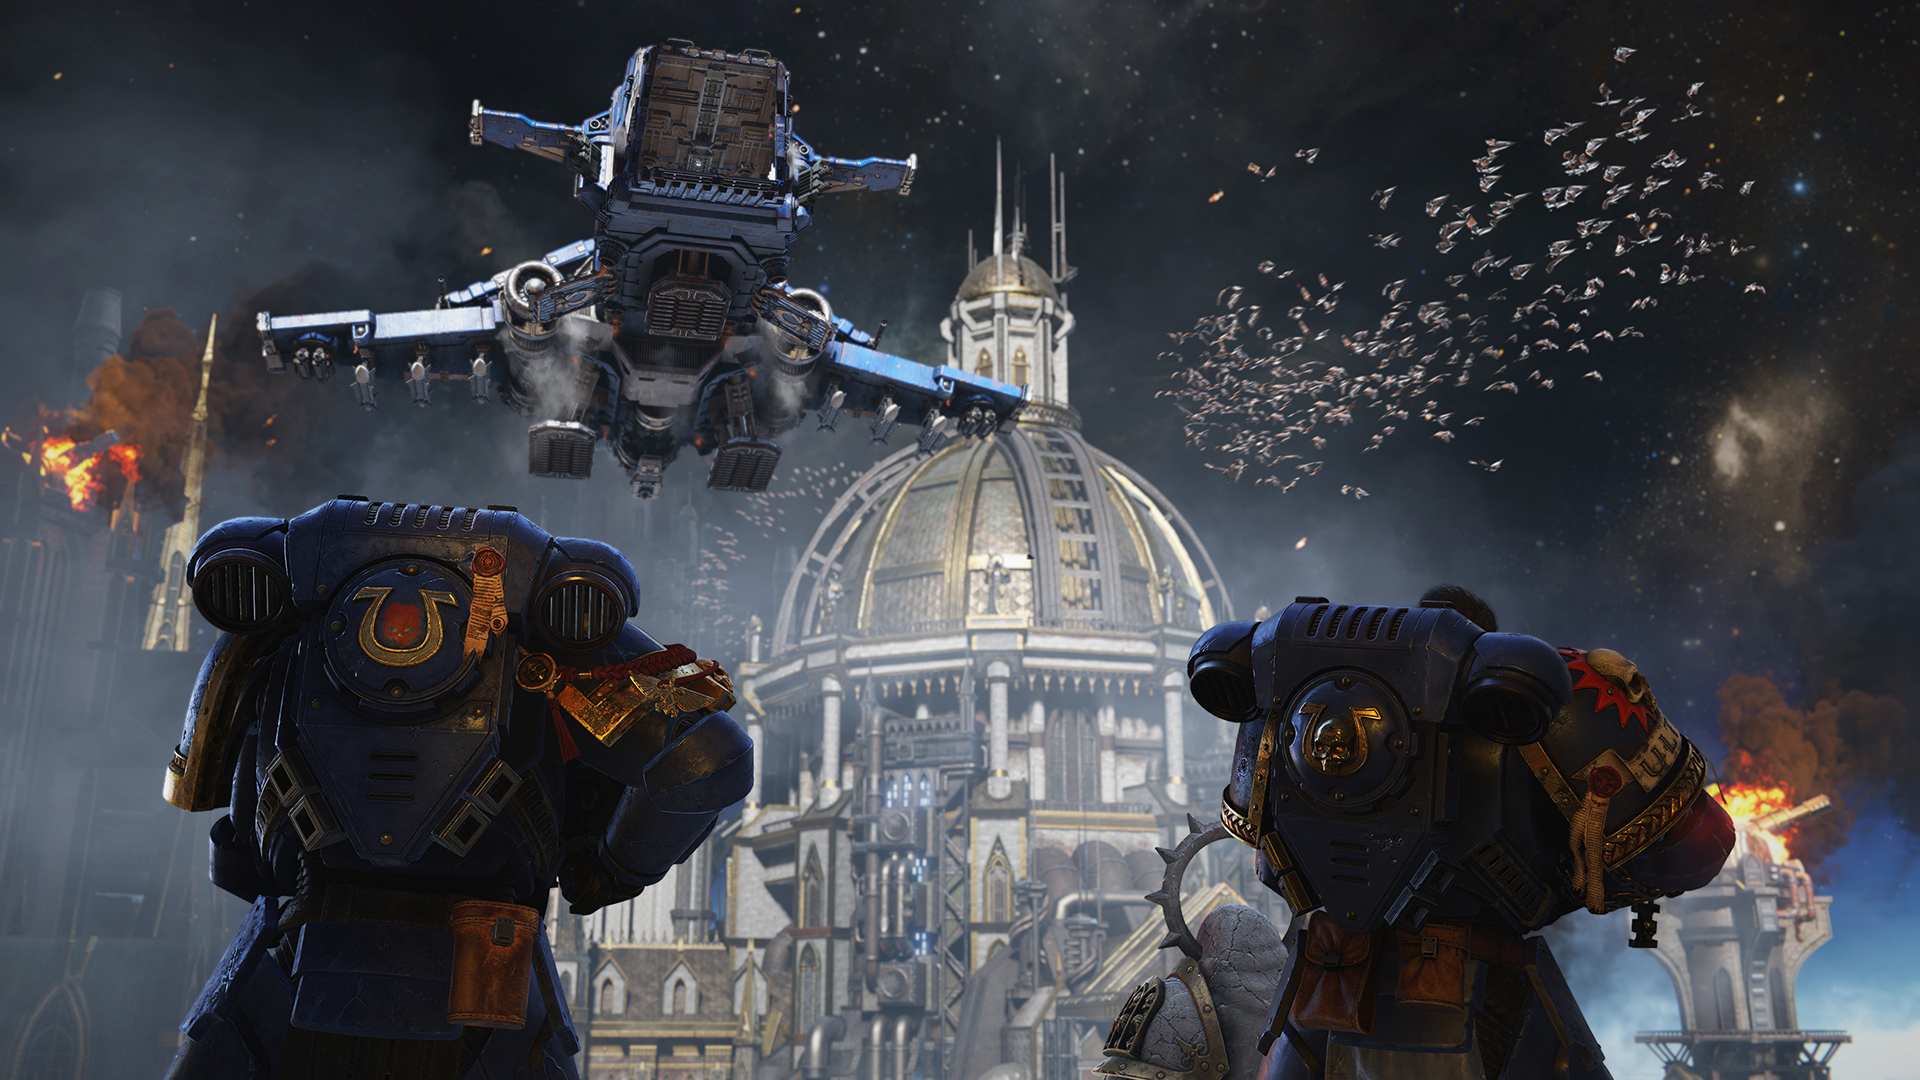 Warhammer 40,000 Space Marine 2 release date, gameplay and latest news